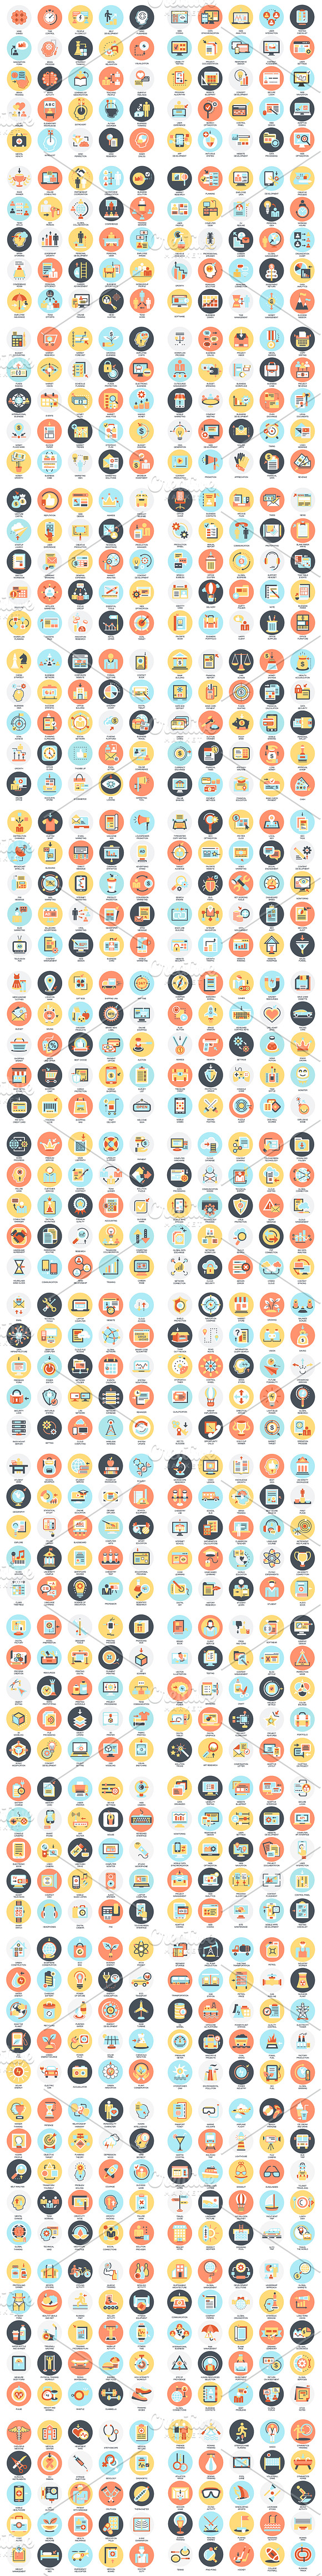 6000+ Flat Icons Bundle in Icons - product preview 7